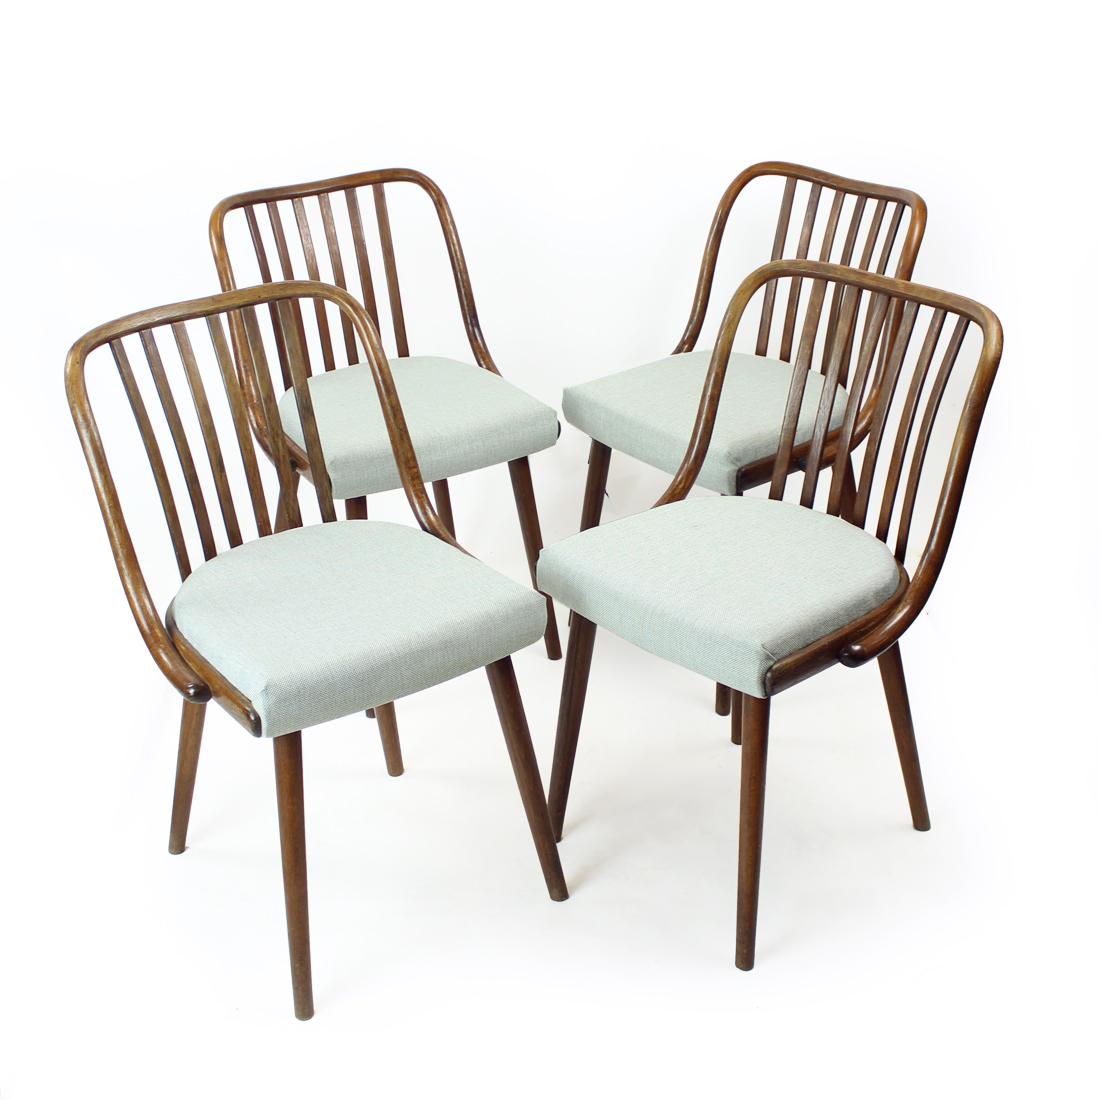 Set Of 4 Dining Chairs In Bent Dark Oak By Jitona, Czechoslovakia 1960s For Sale 4